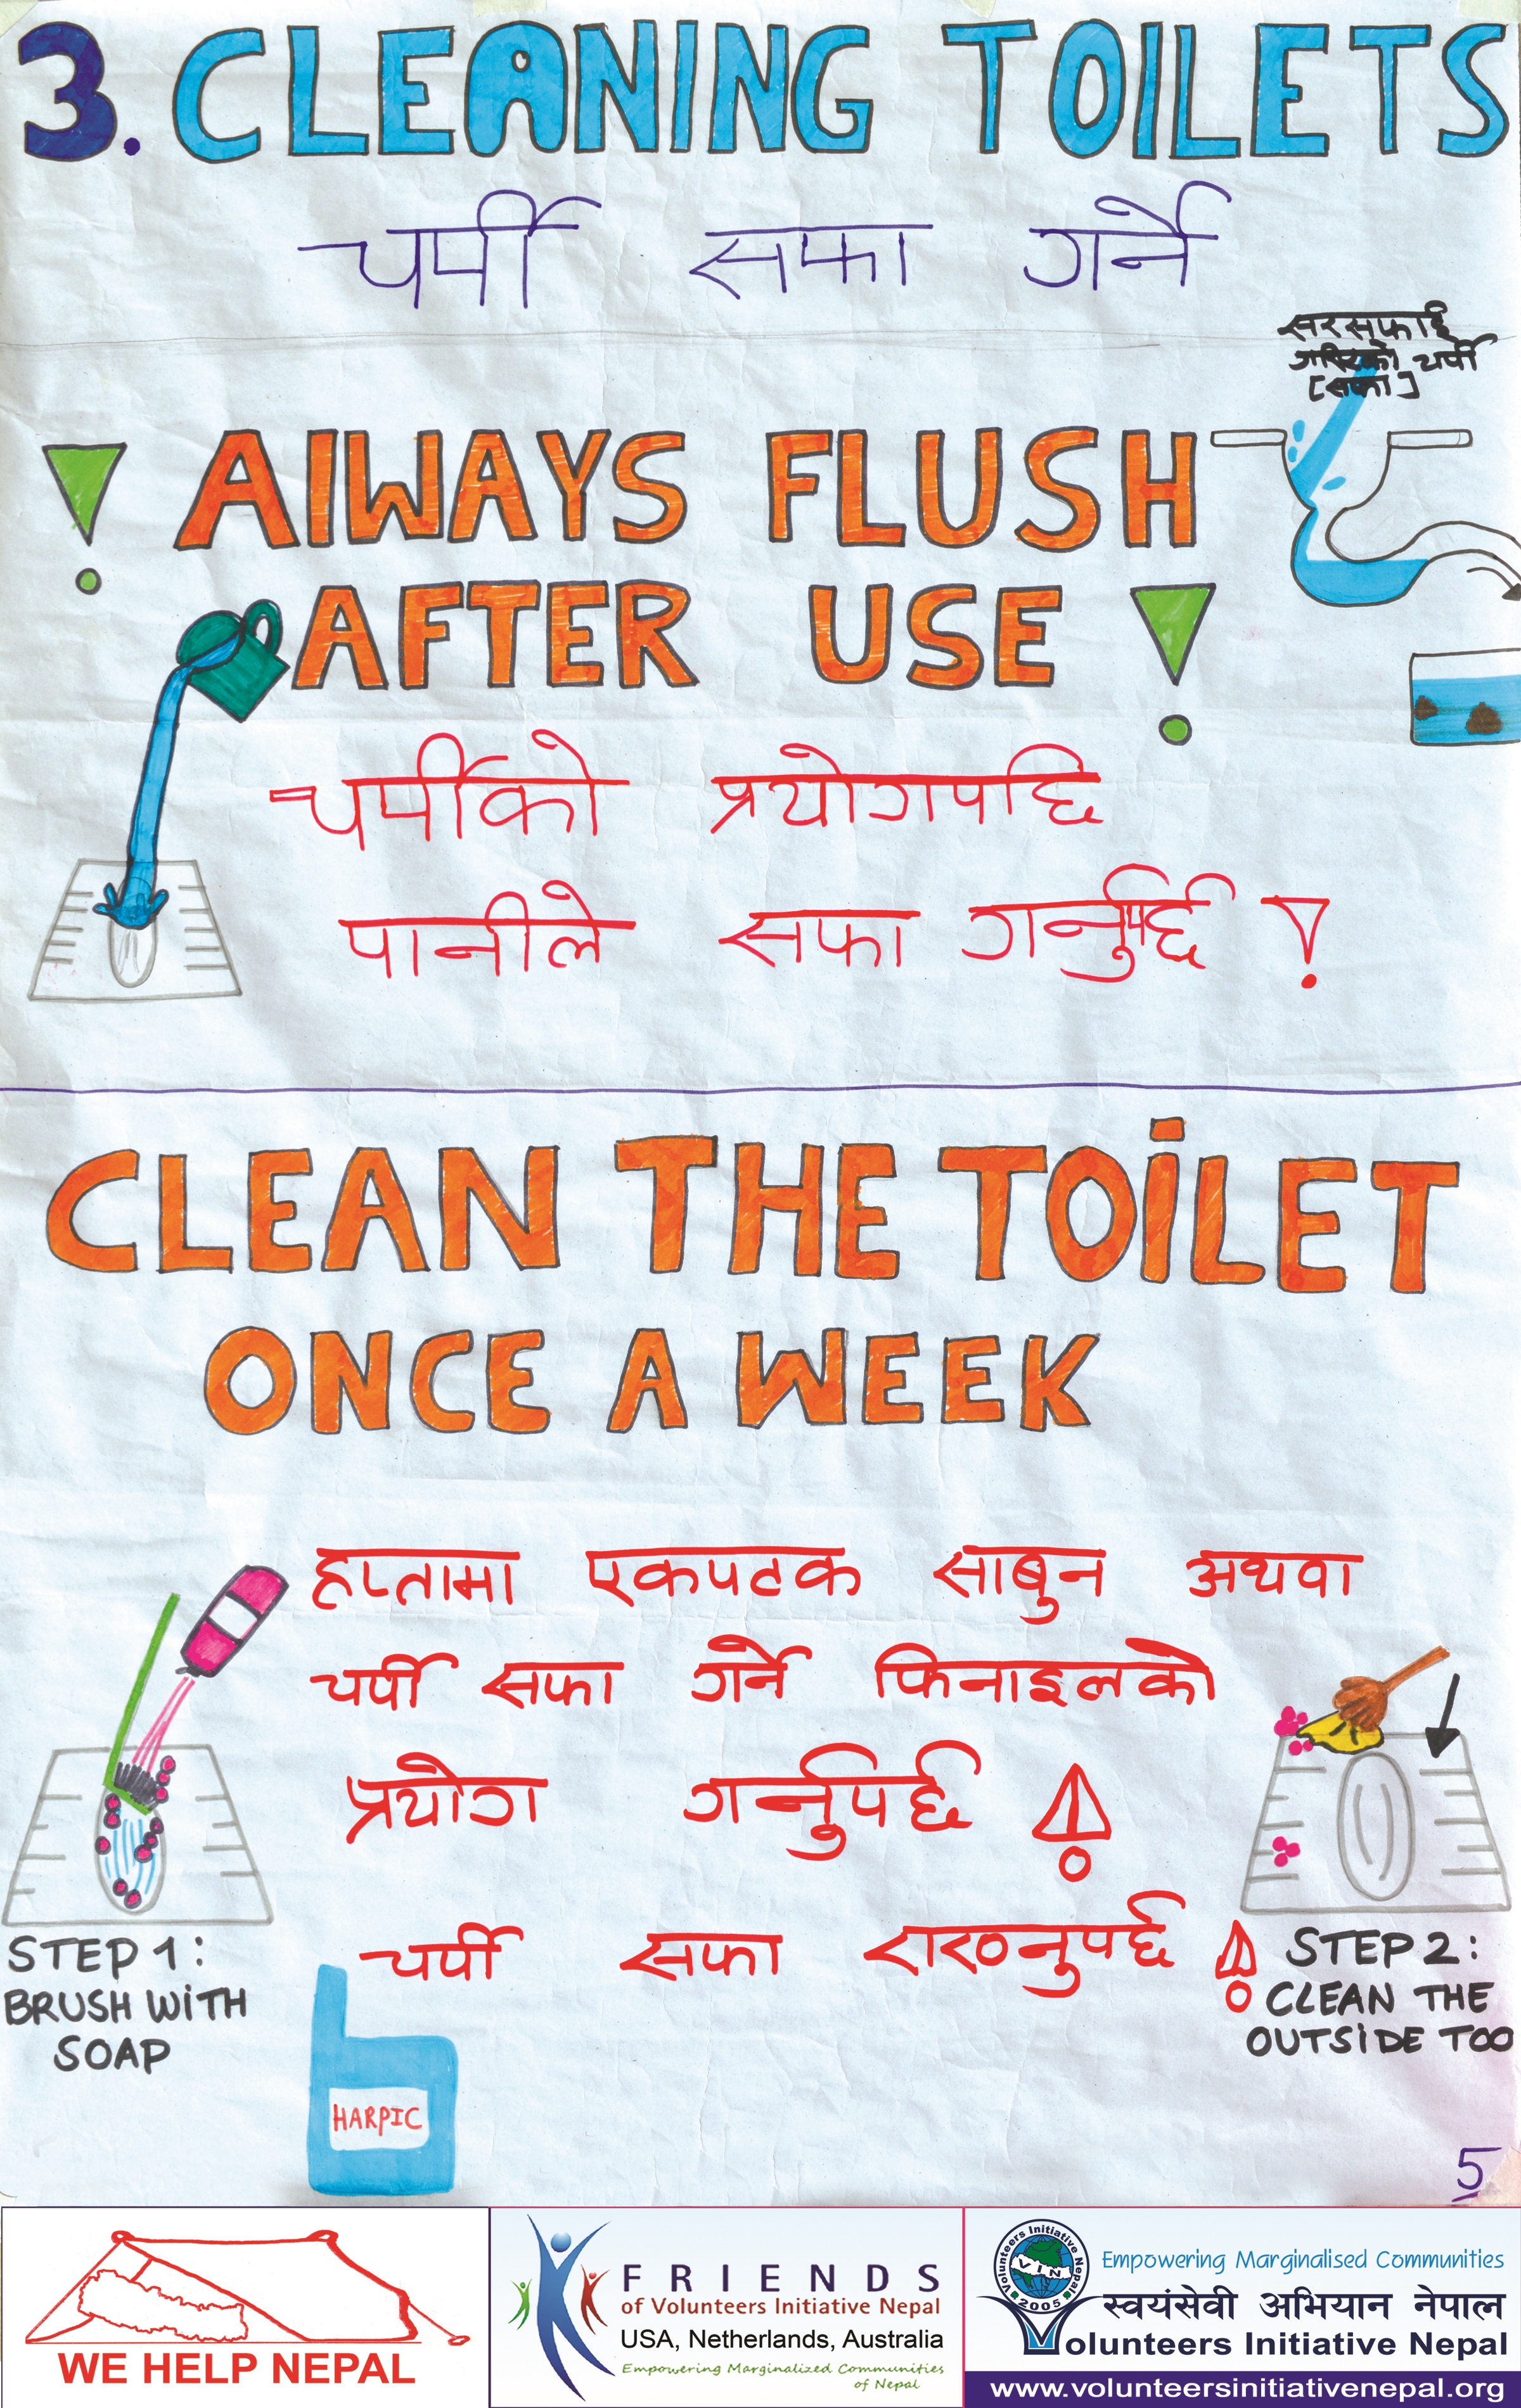 Cleaning toilet pamplet